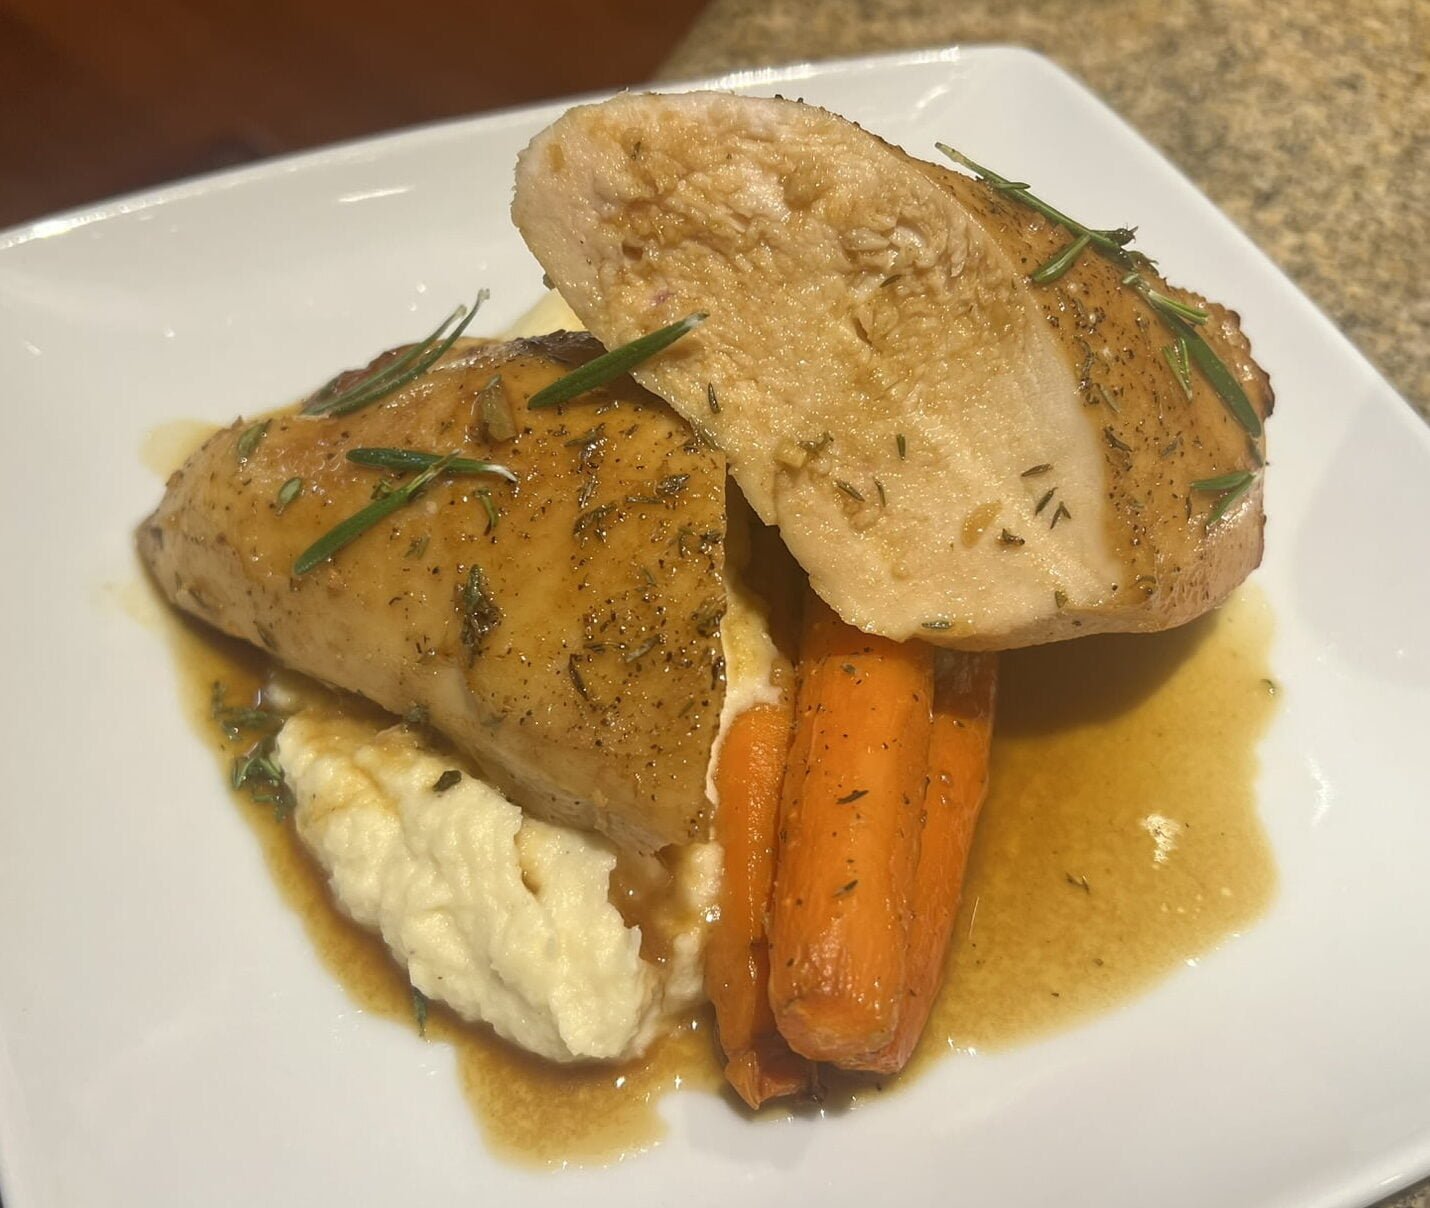 Chicken with Maple Dijon Glaze, carrots, and Parsnip Puree